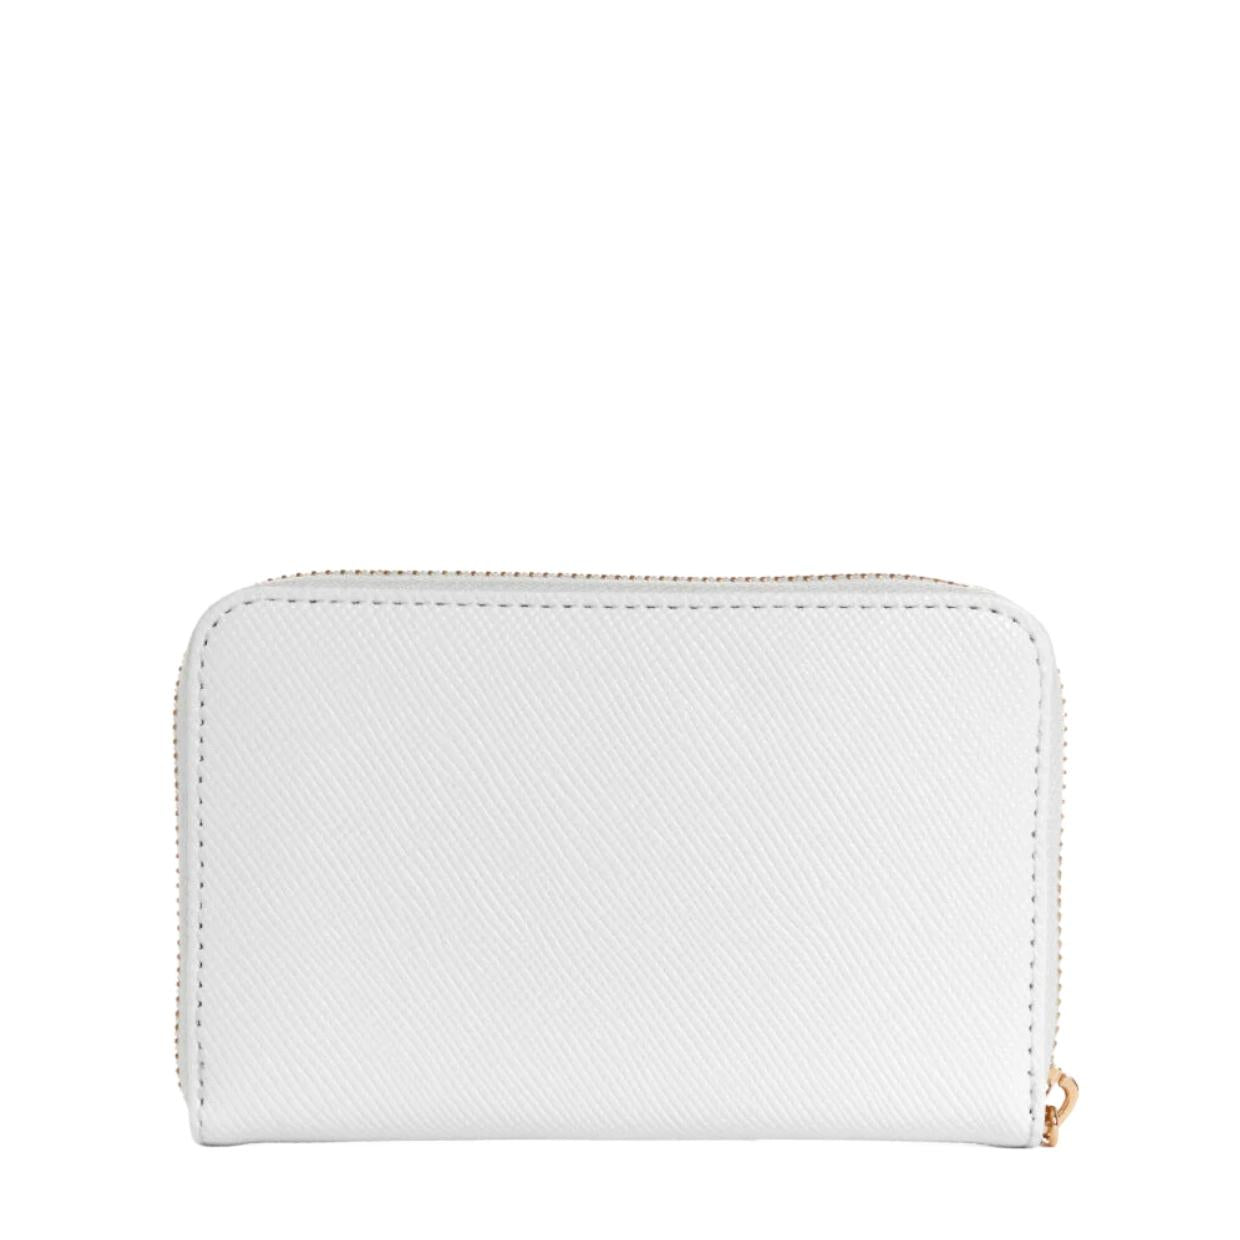 Guess Triangle Logo White Laurel SLG Wallet